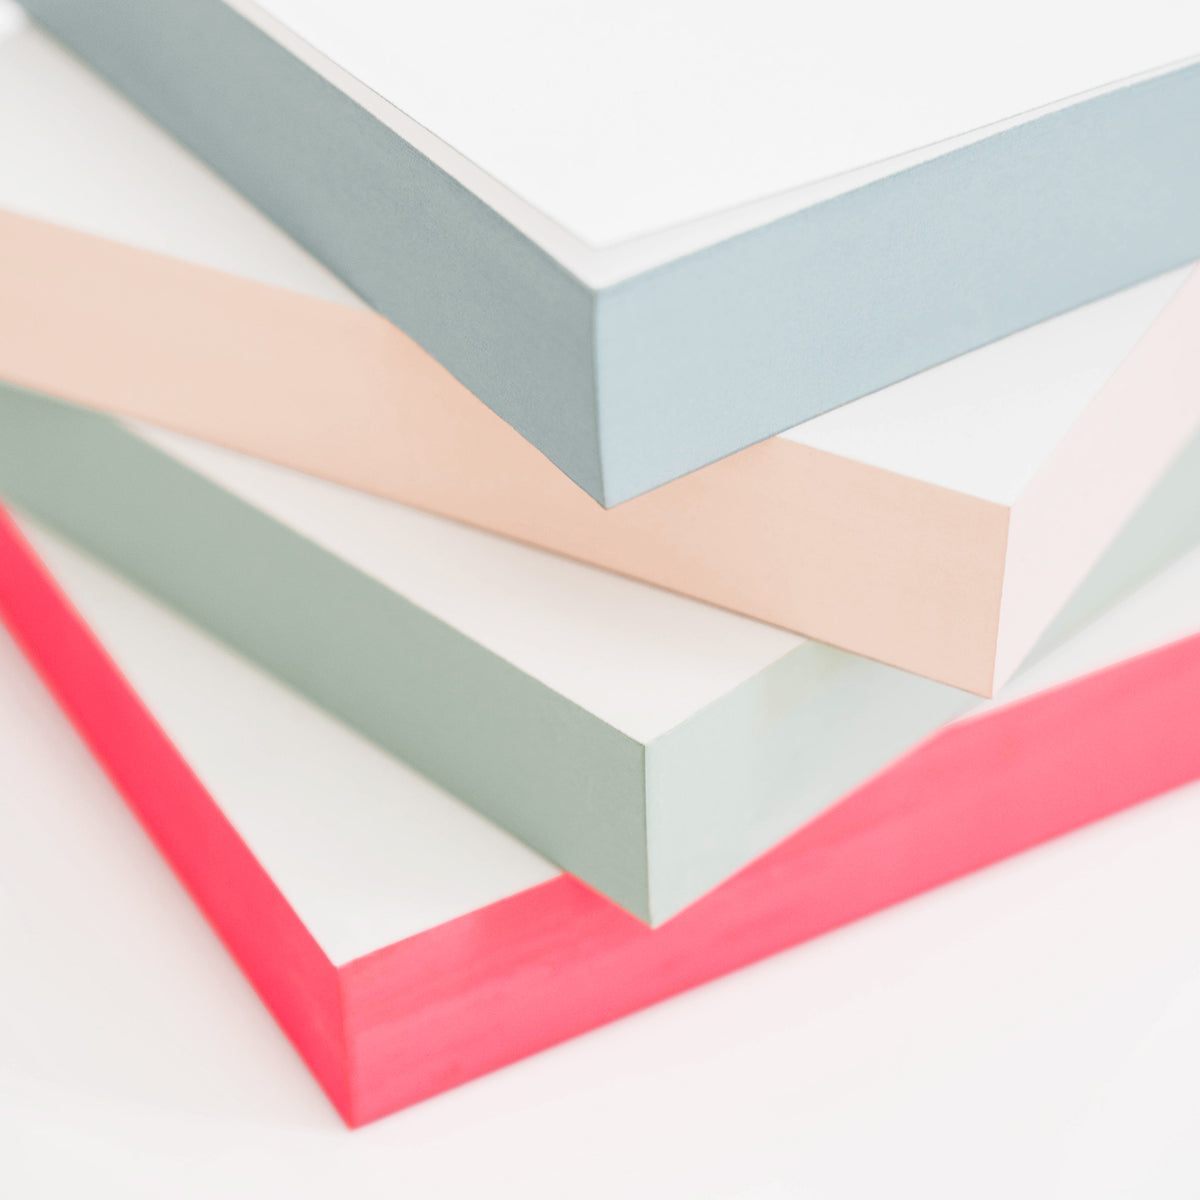 Stack of painted notepads in various colors